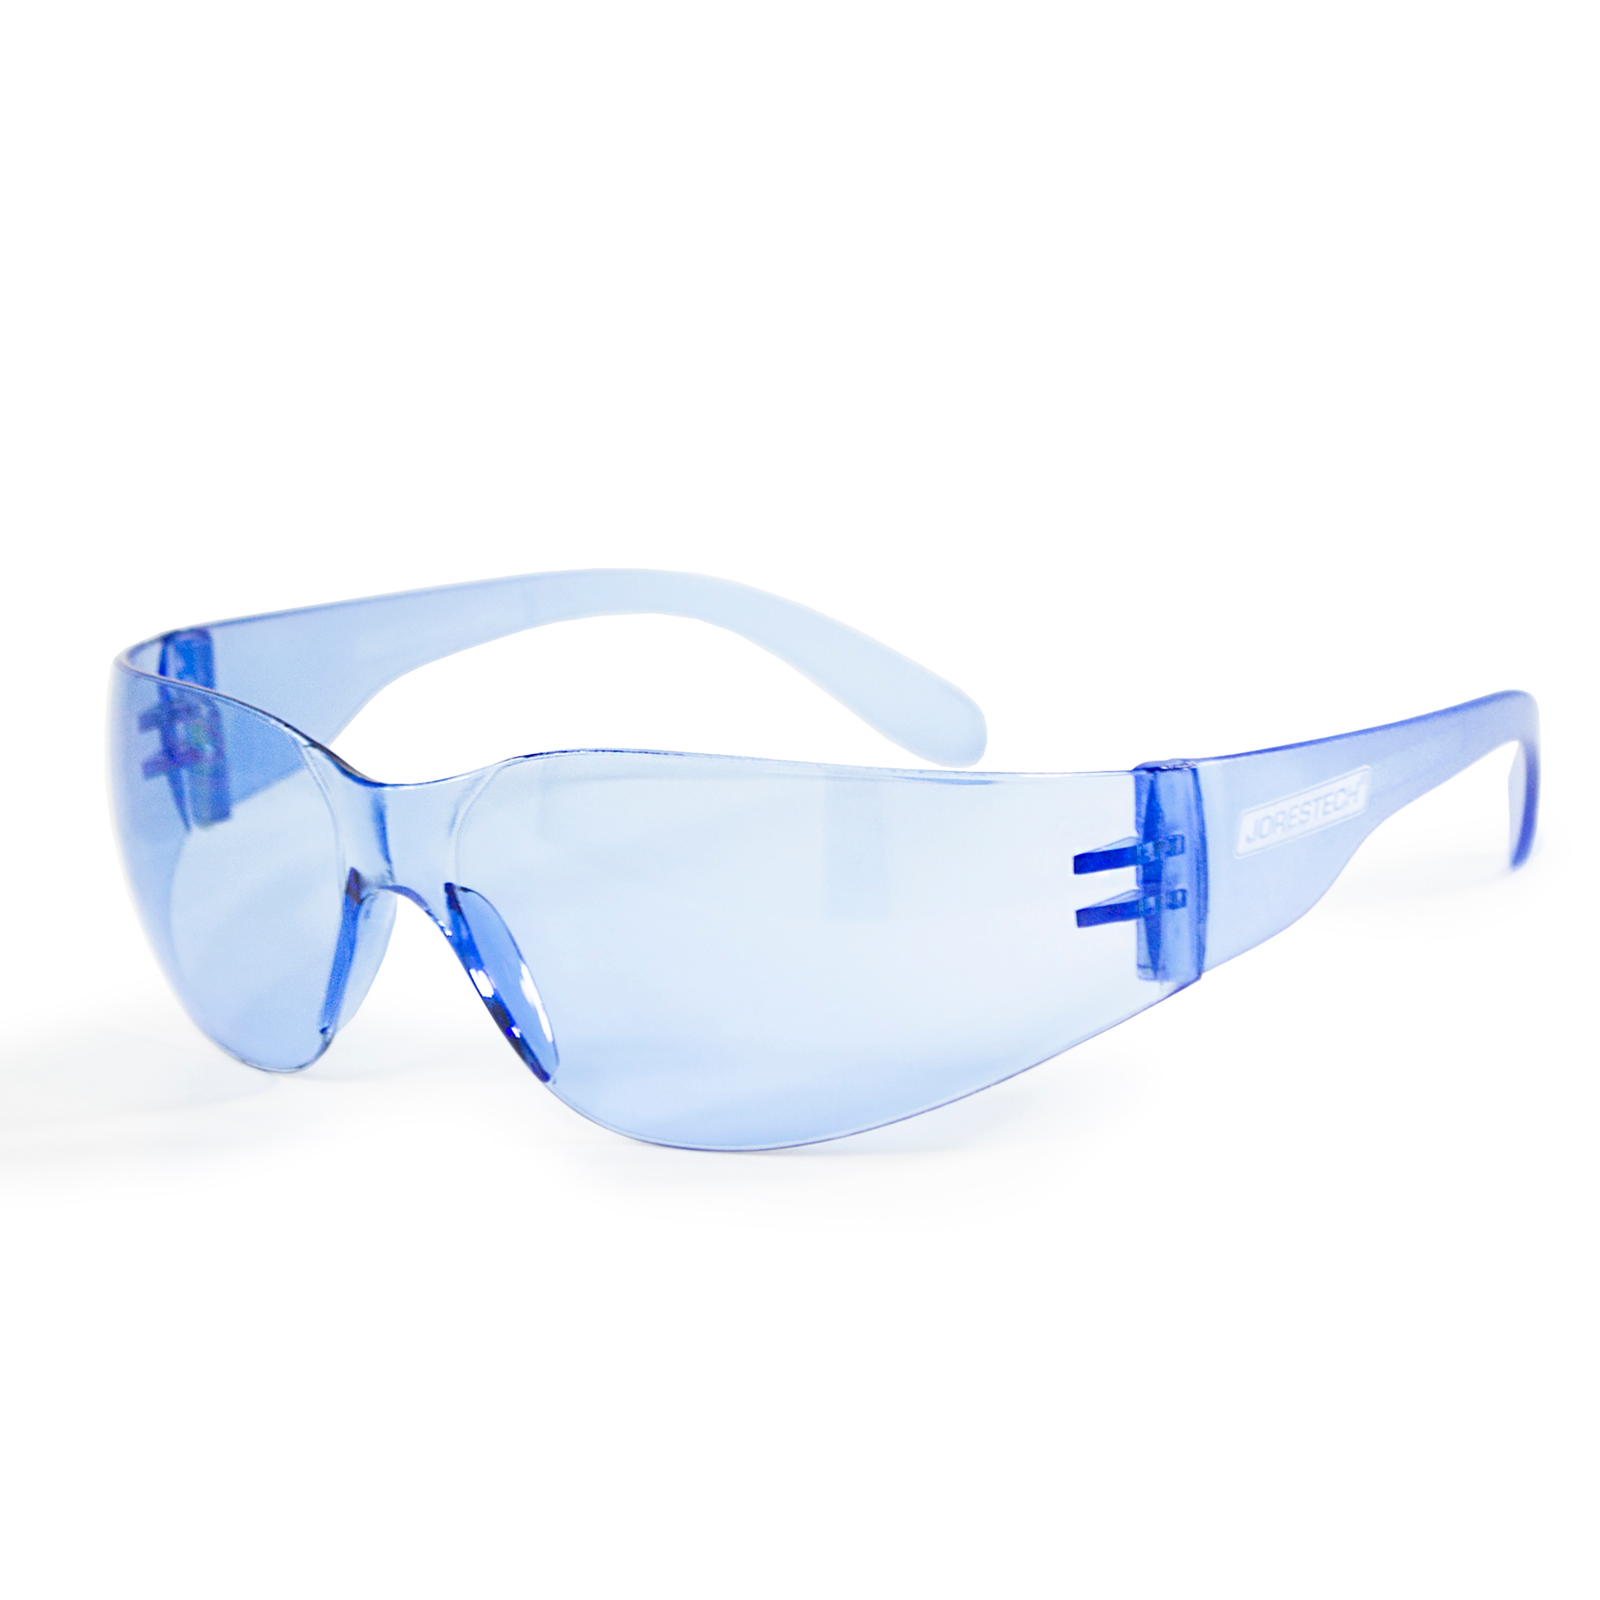 Features one JORESTECH high impact scratch resistant glasses with UV protection blue lenses and blue temples